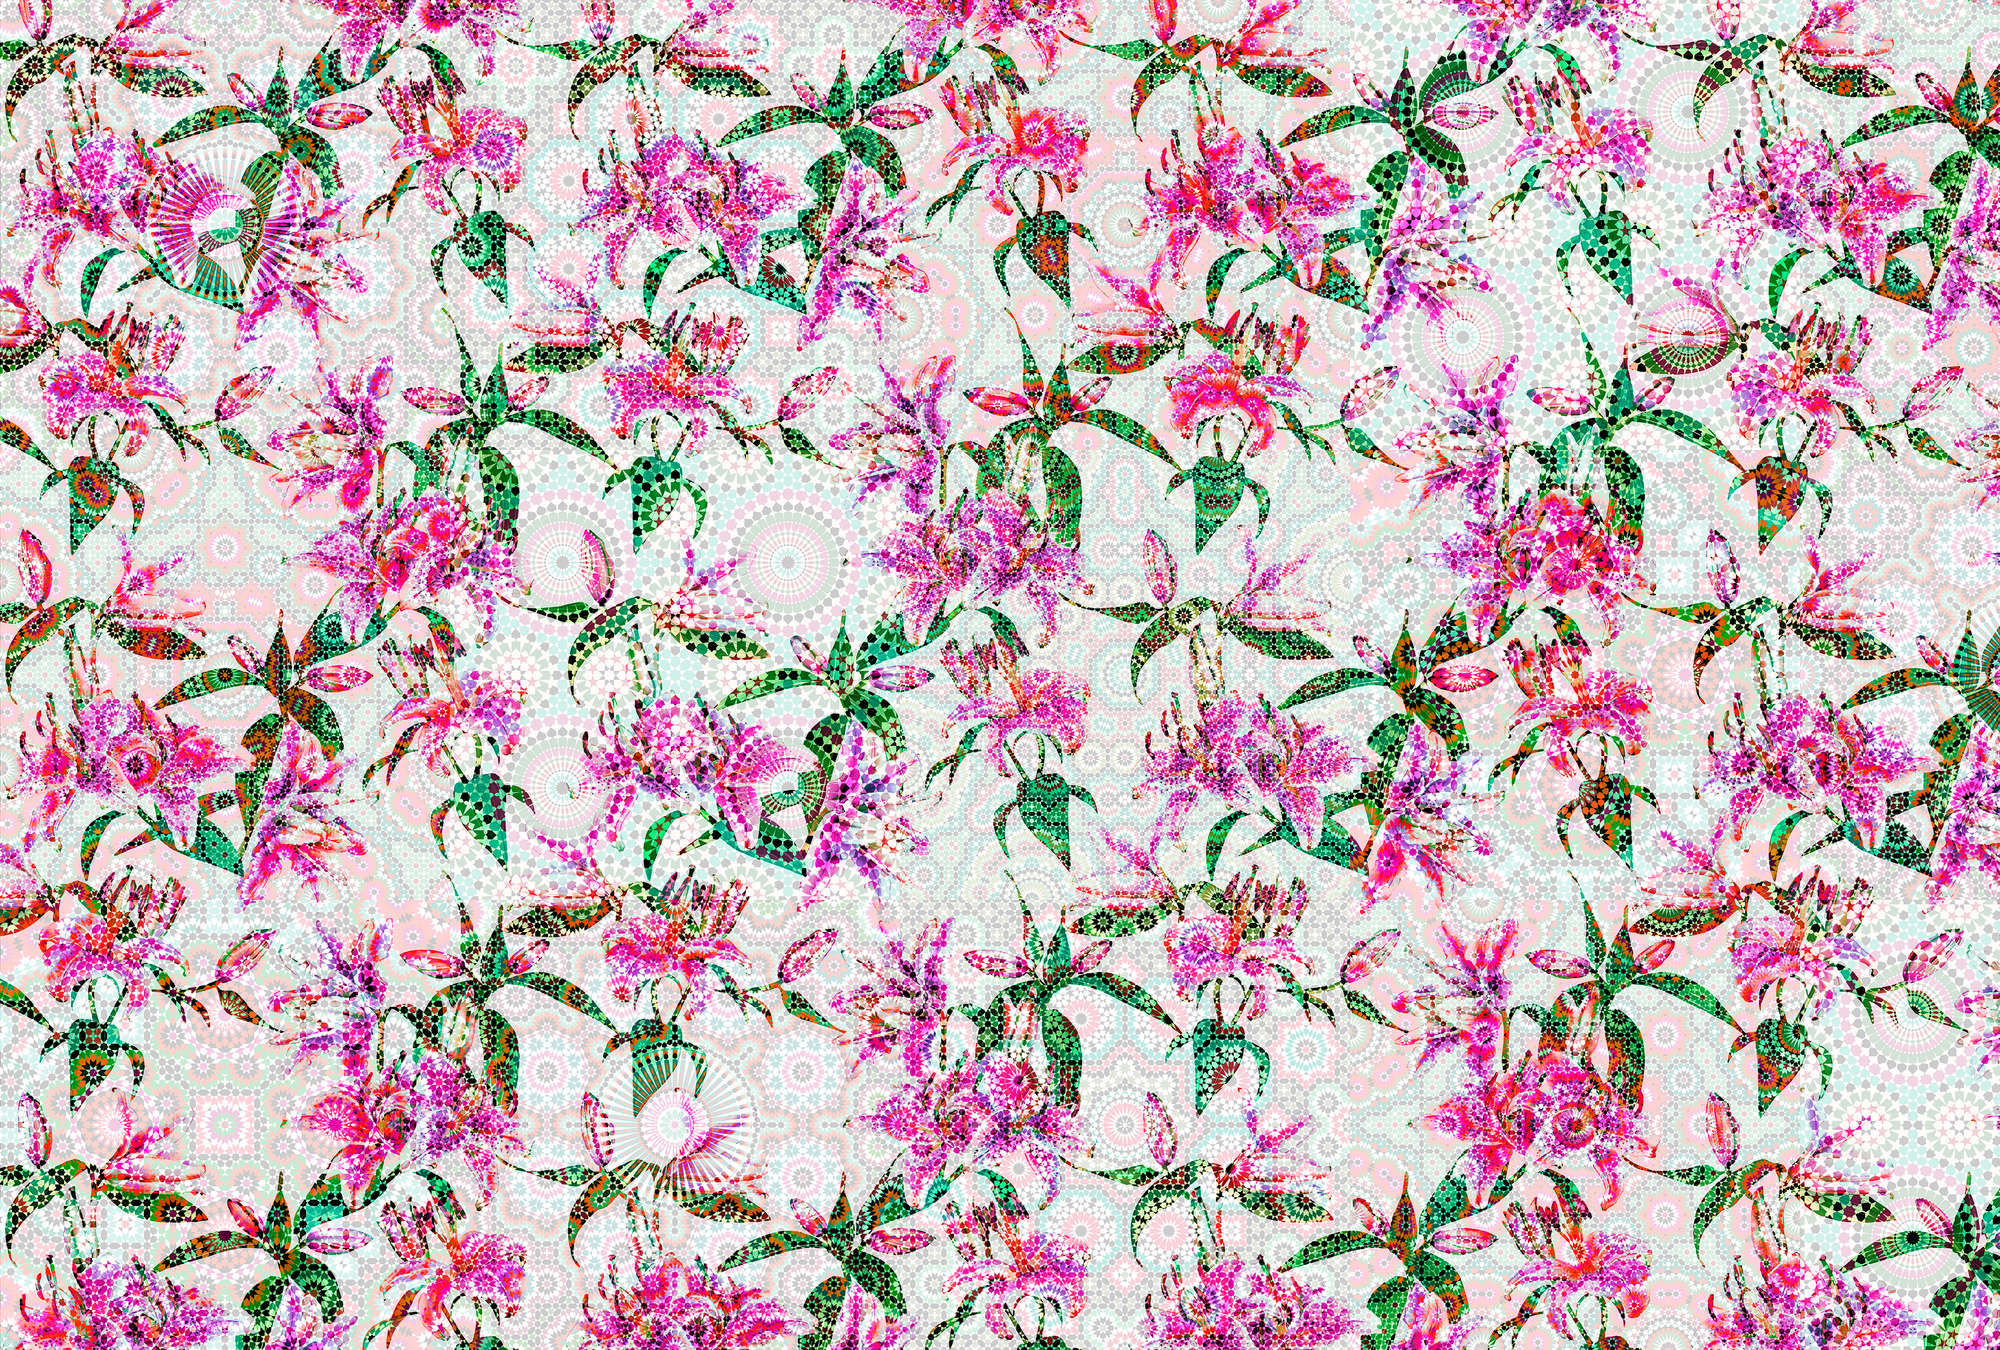             Photo wallpaper lilies with colourful mosaic design - pink, green
        